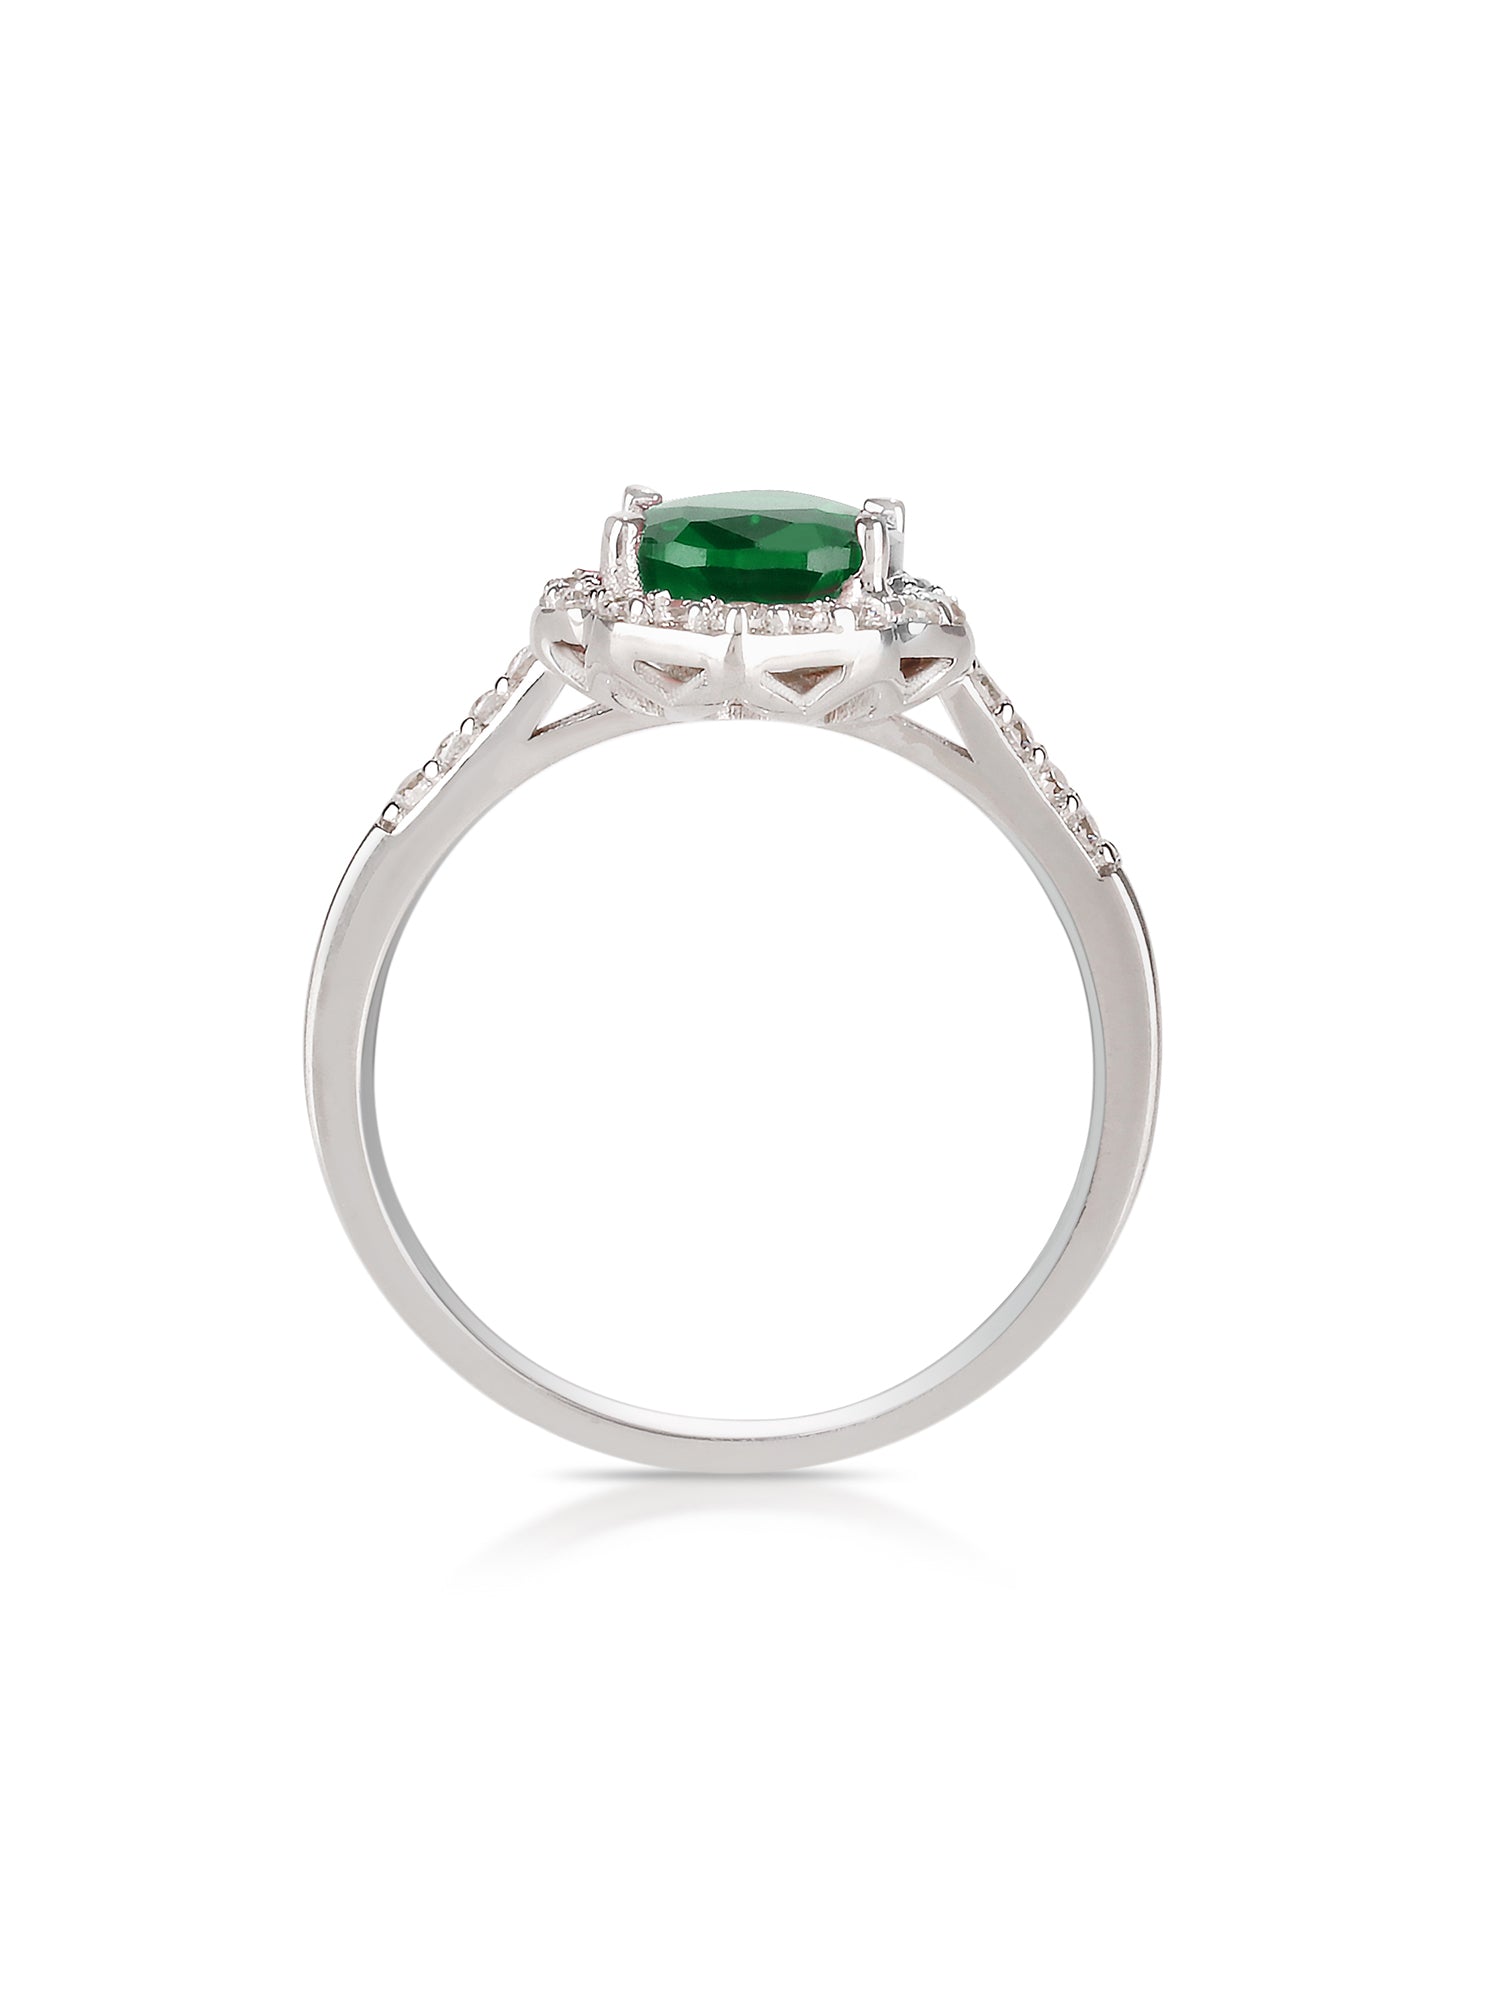 EMERALD PEAR SHAPED SIMPLE RING-2